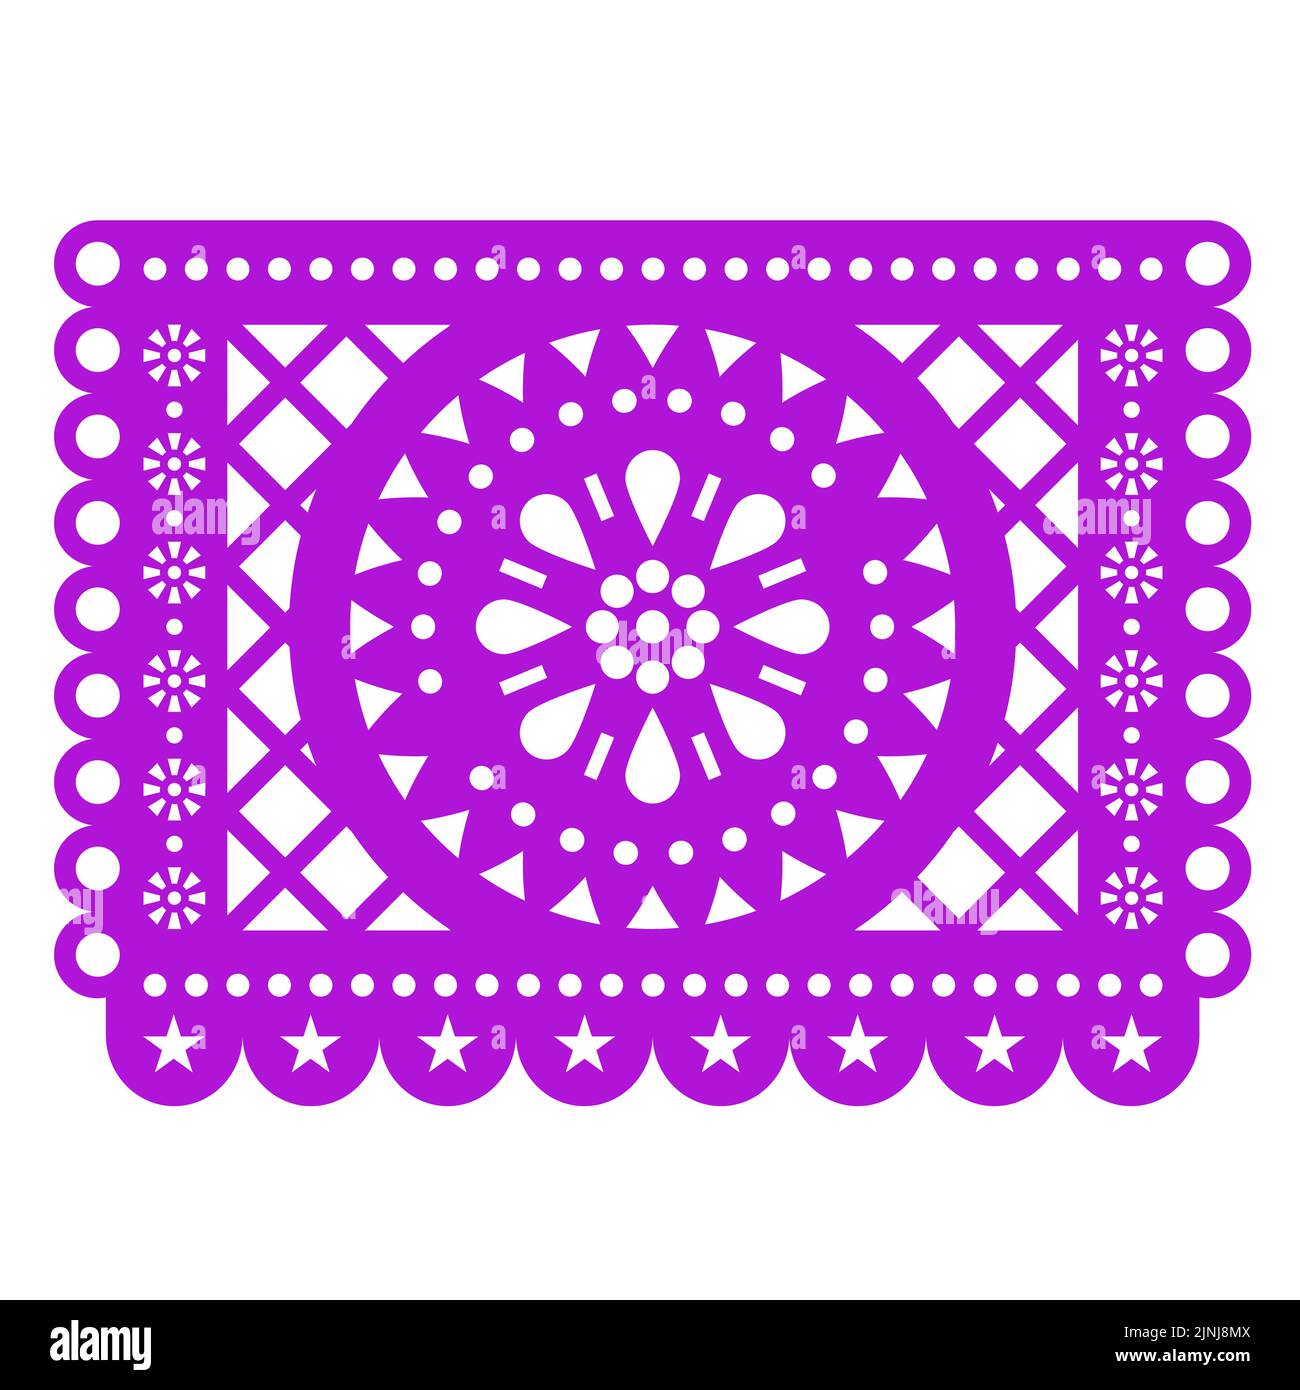 Papel Picado vector design with floral mandala, grid and geometric shapes, Mexican cutout paper garland decoration Stock Vector